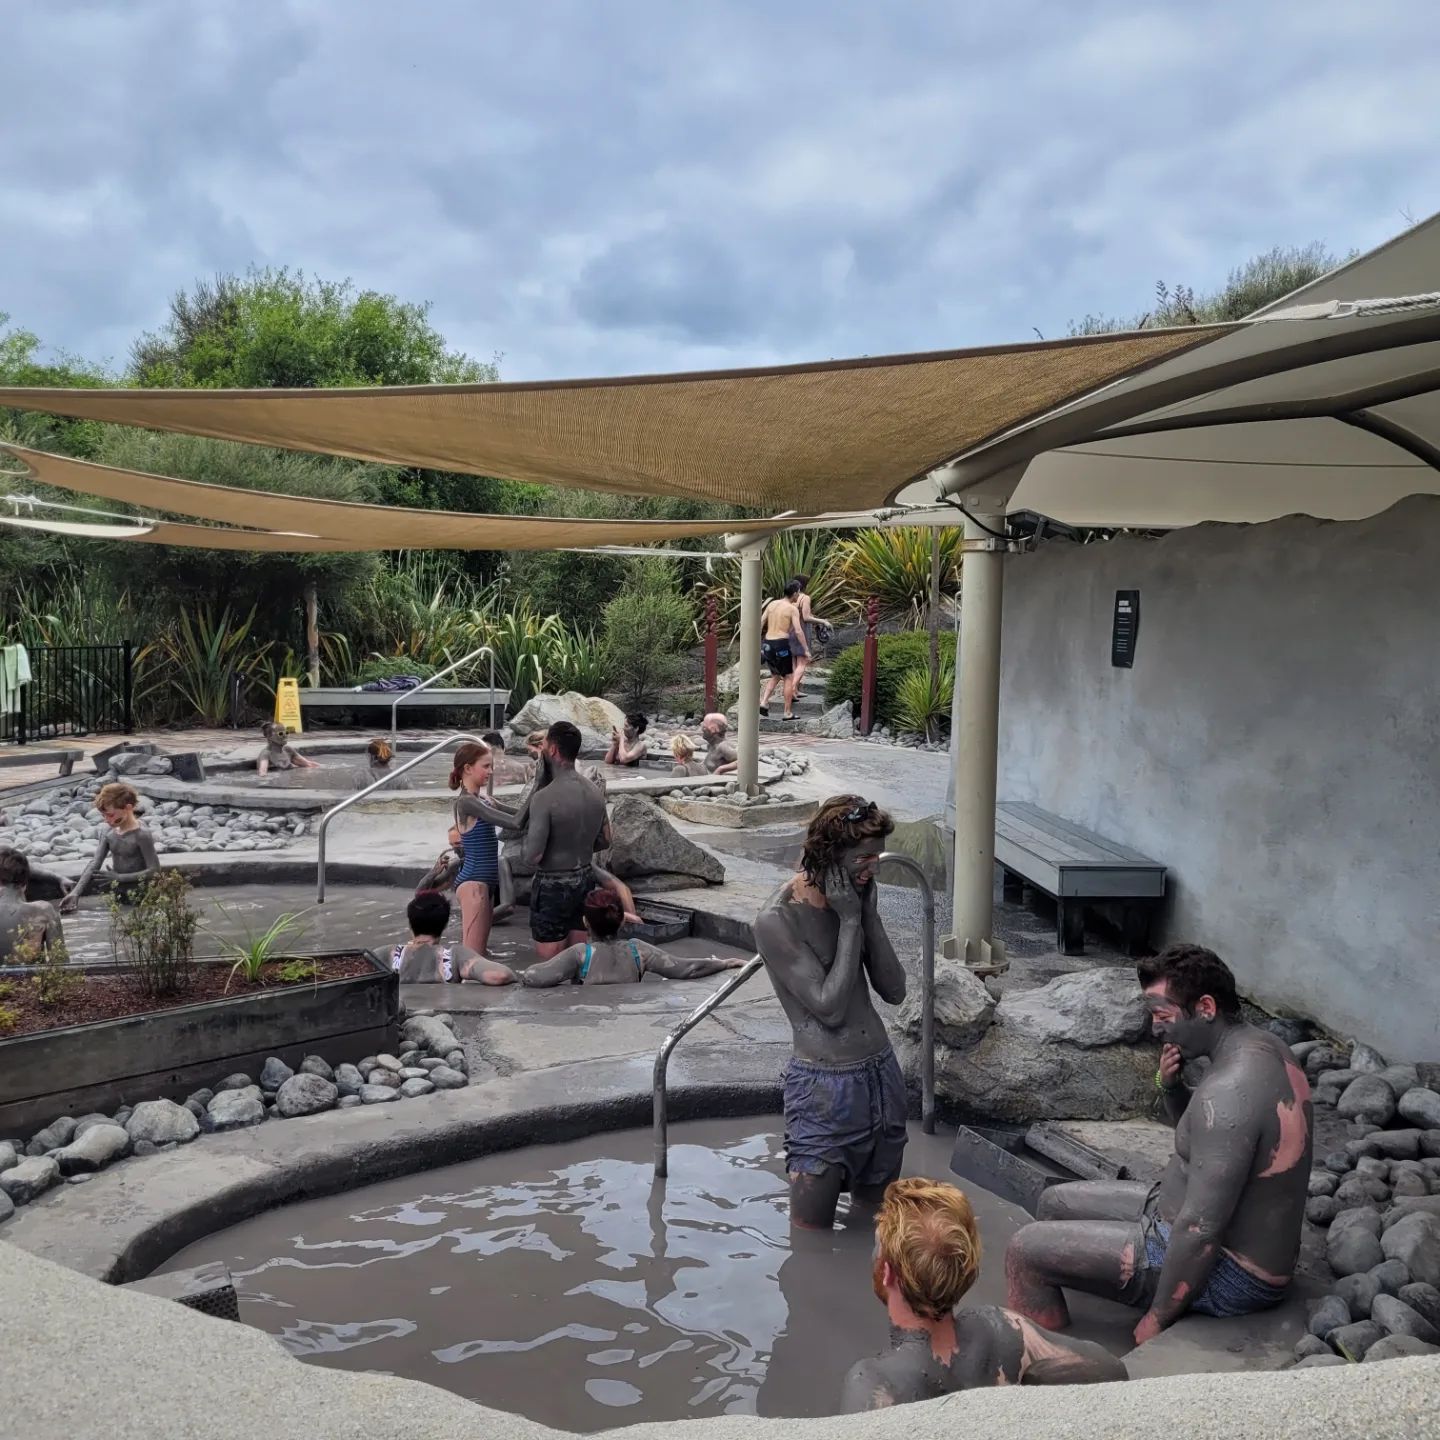 New Zealand itinerary for winter activities 2023 - mud spa